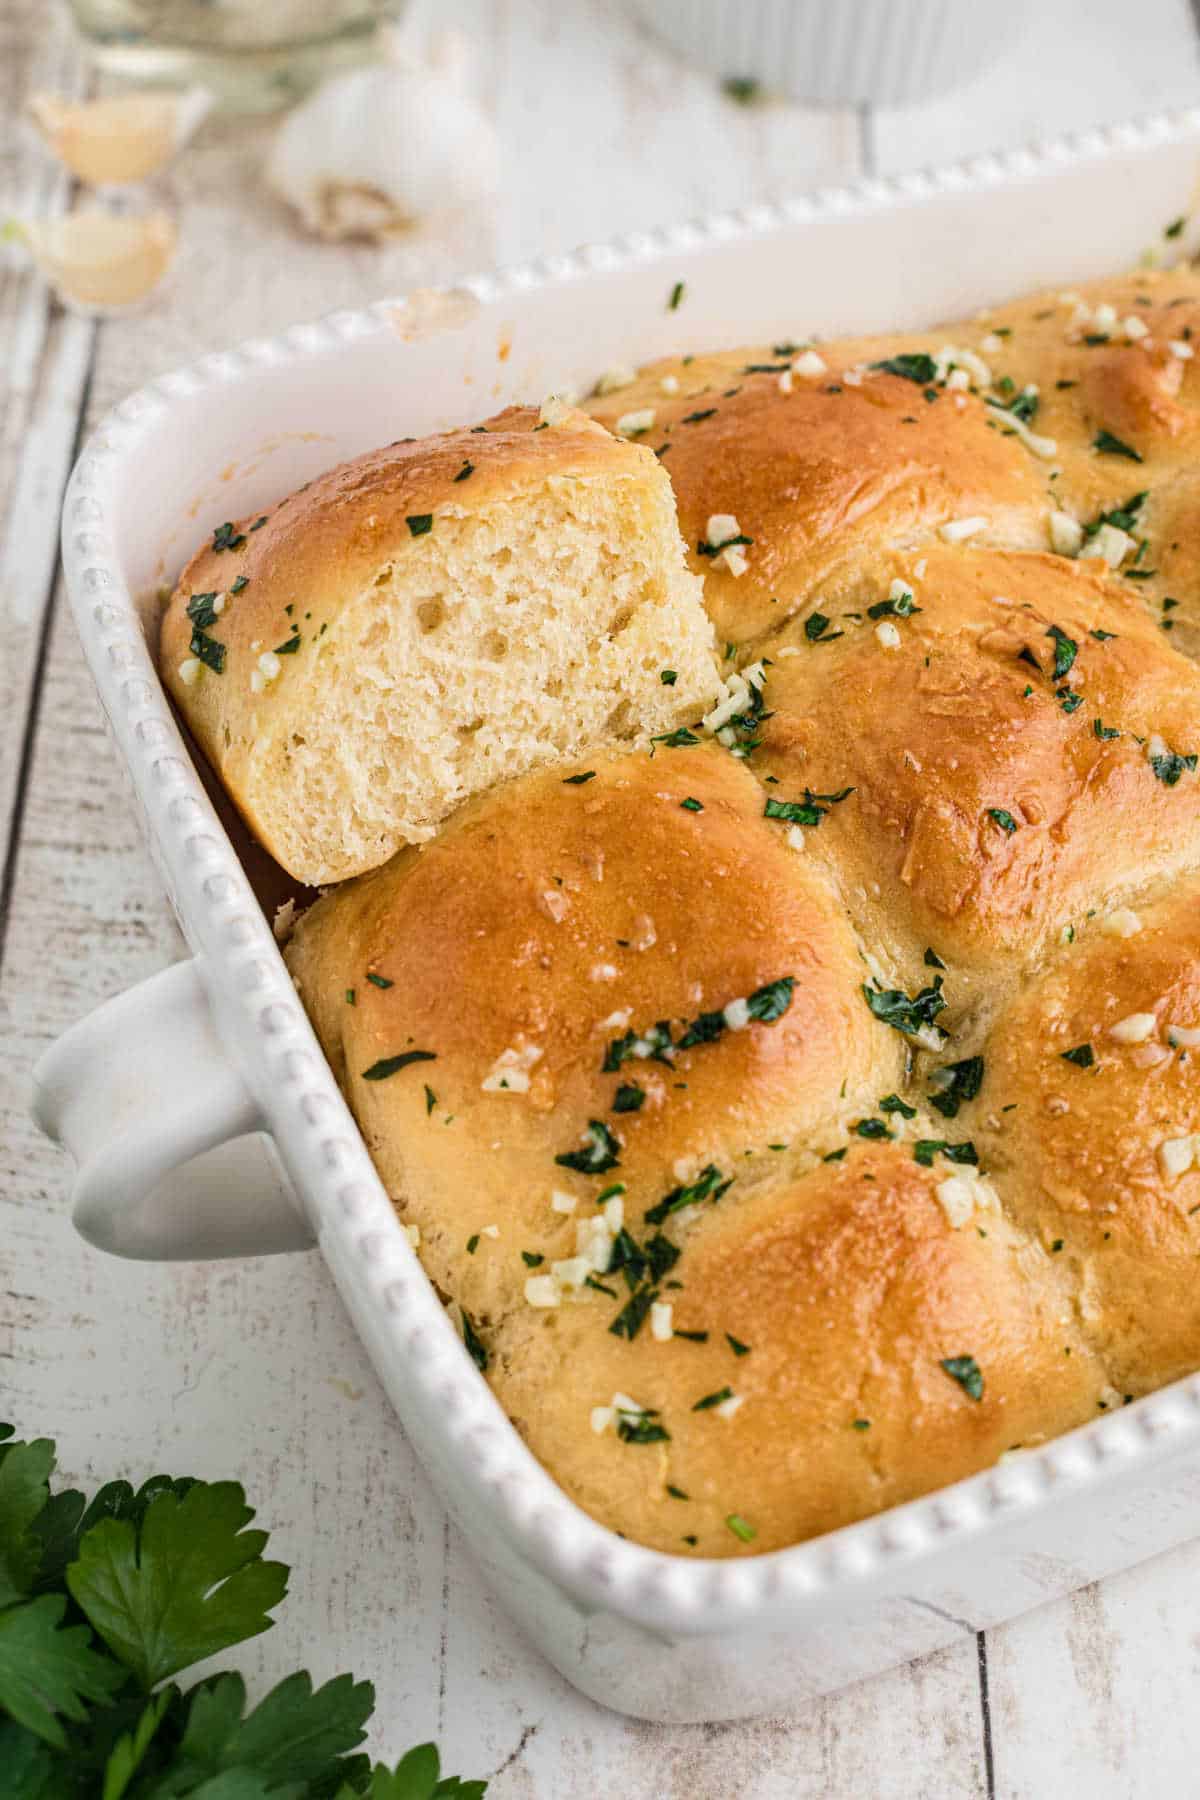 Garlic butter rolls in a baking dish, a corner shot. One corner roll standing on its side.